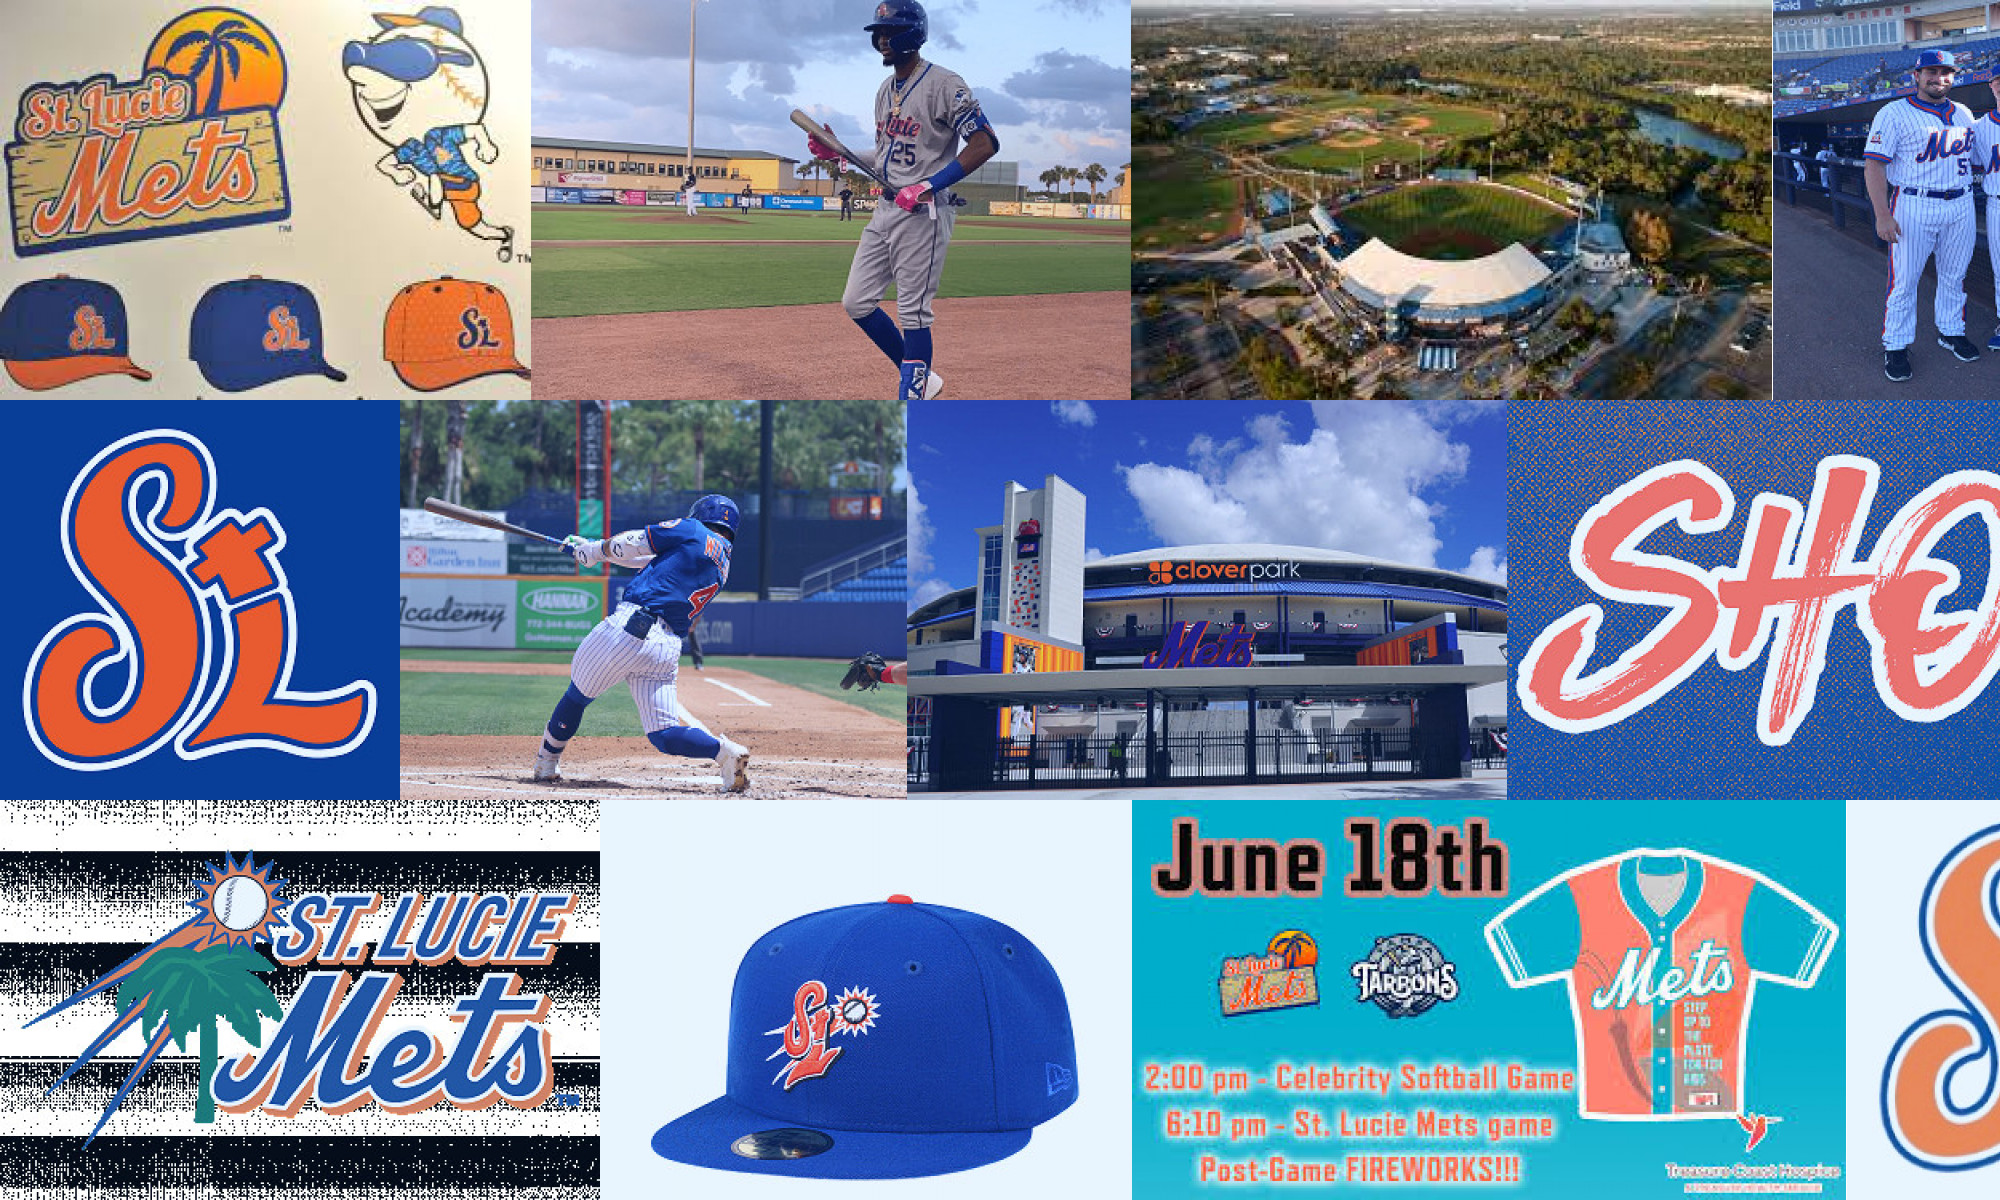 st. lucie mets